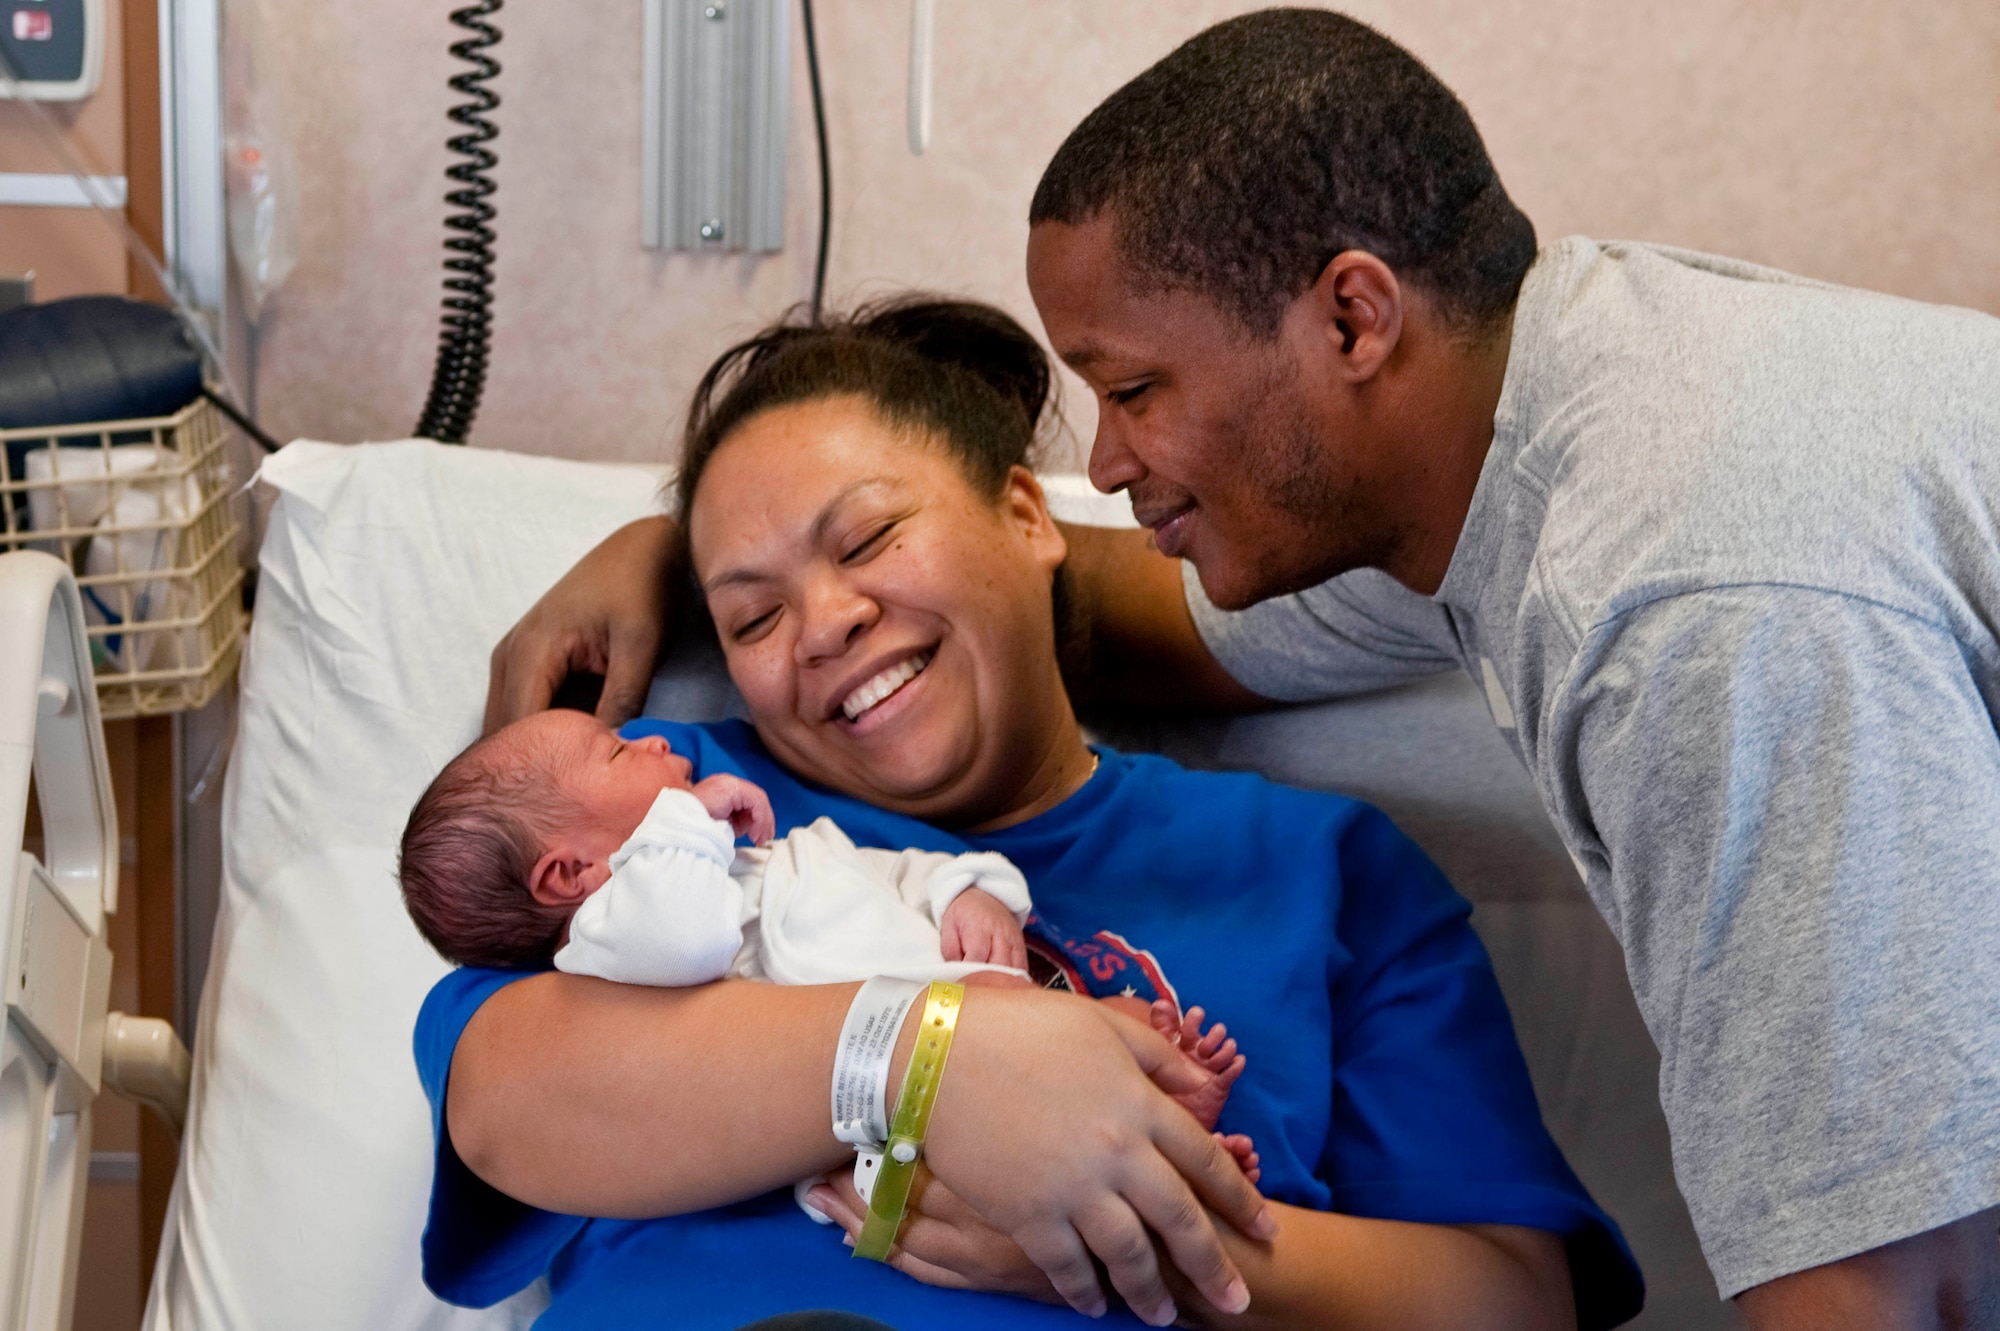 NELLIS AIR FORCE BASE, Nev.-Tech. Sgt. TJ Merritt, 57th Aircraft Maintenance Squadron weapons expeditor, and his wife, Bernadette, smile at their newborn son, Kamali'i, Jan. 4 at the Mike O'Callaghan Federal Hospital. Born Jan. 3 at 5:58 a.m., Kamali'i was the first child born at Nellis in 2011. (U.S. Air Force photo by Airman 1st Class George Goslin)